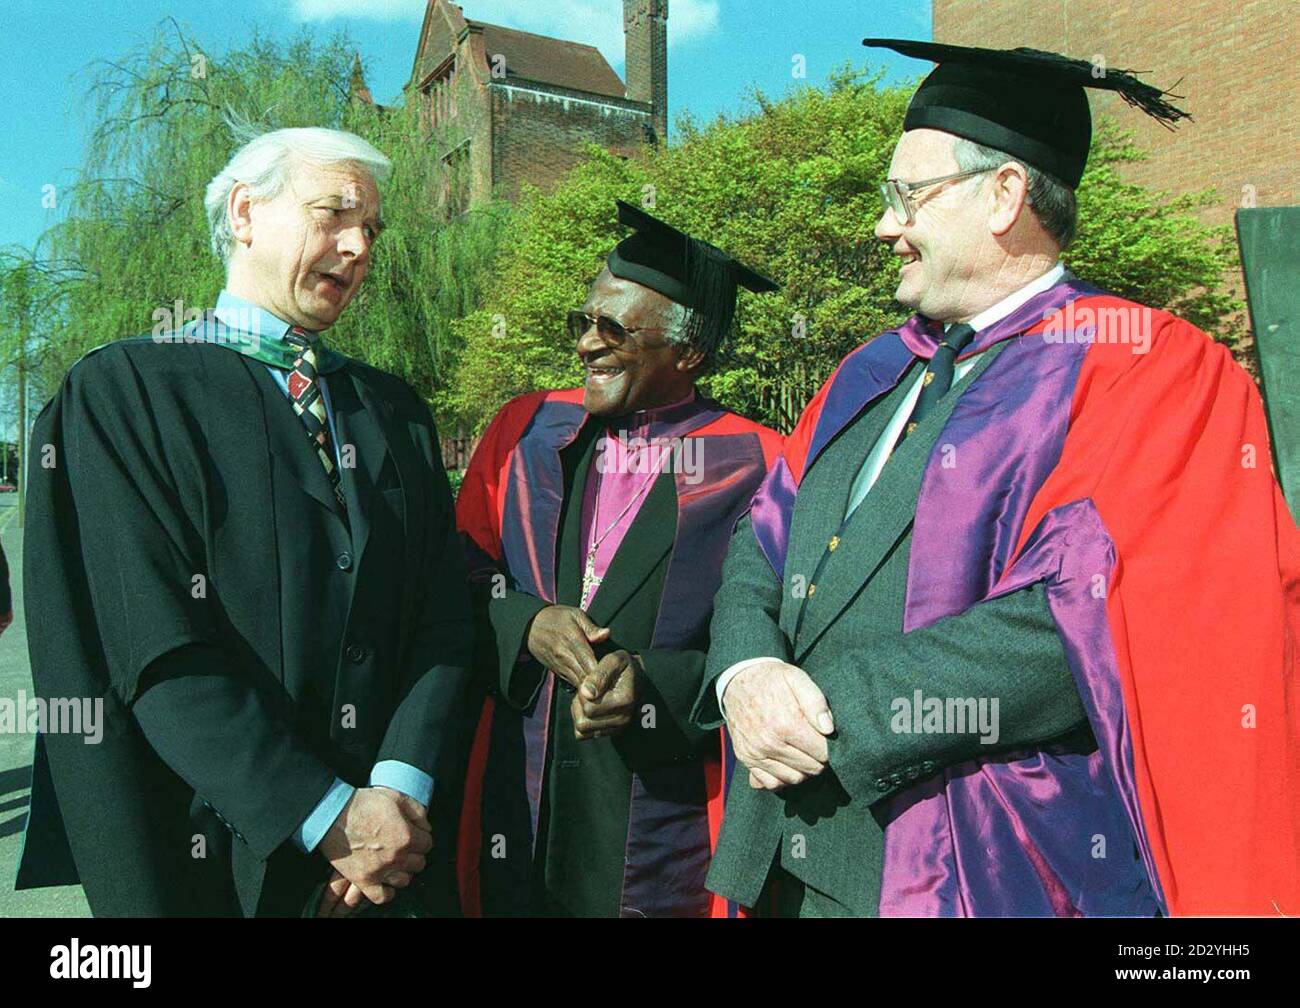 Archbishop Dr Desmond Tutu (centre) speaks to TV/radio presenter John Humphrys (left) and pathologist Bernard Knight, at the University of Wales, in Cardiff, today (Saturday), where they are among 15 people whose achievements in public, academic and cultural life are being recognised by the University. See PA story AWARDS Tutu. /PA Stock Photo